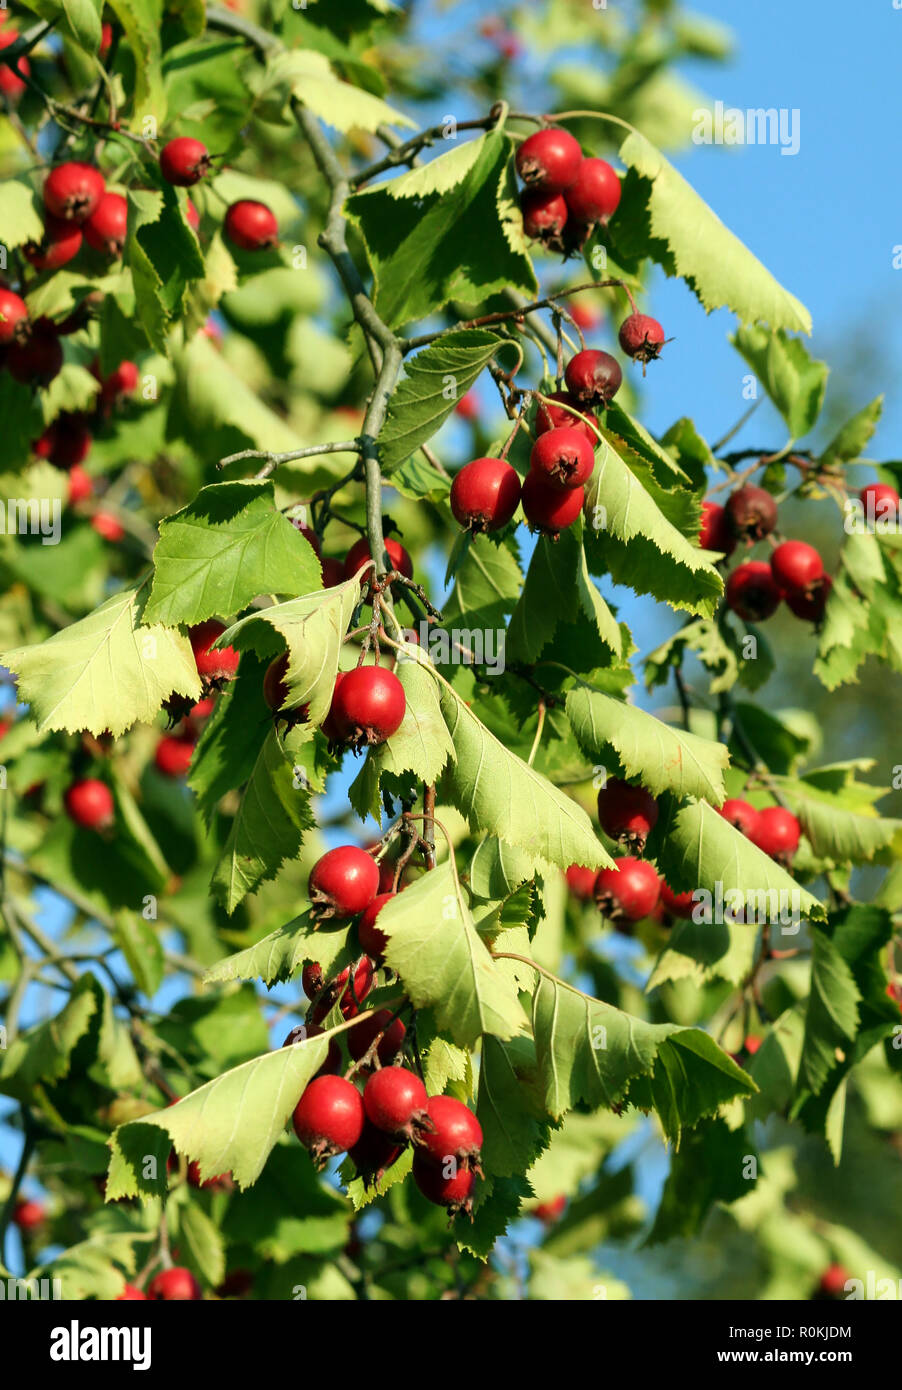 crataegus, hawthorn, haw,  big branch with green leaves and bright red berries against a blue sky, ripe fruit lit by the sun, daylight, grows natural Stock Photo